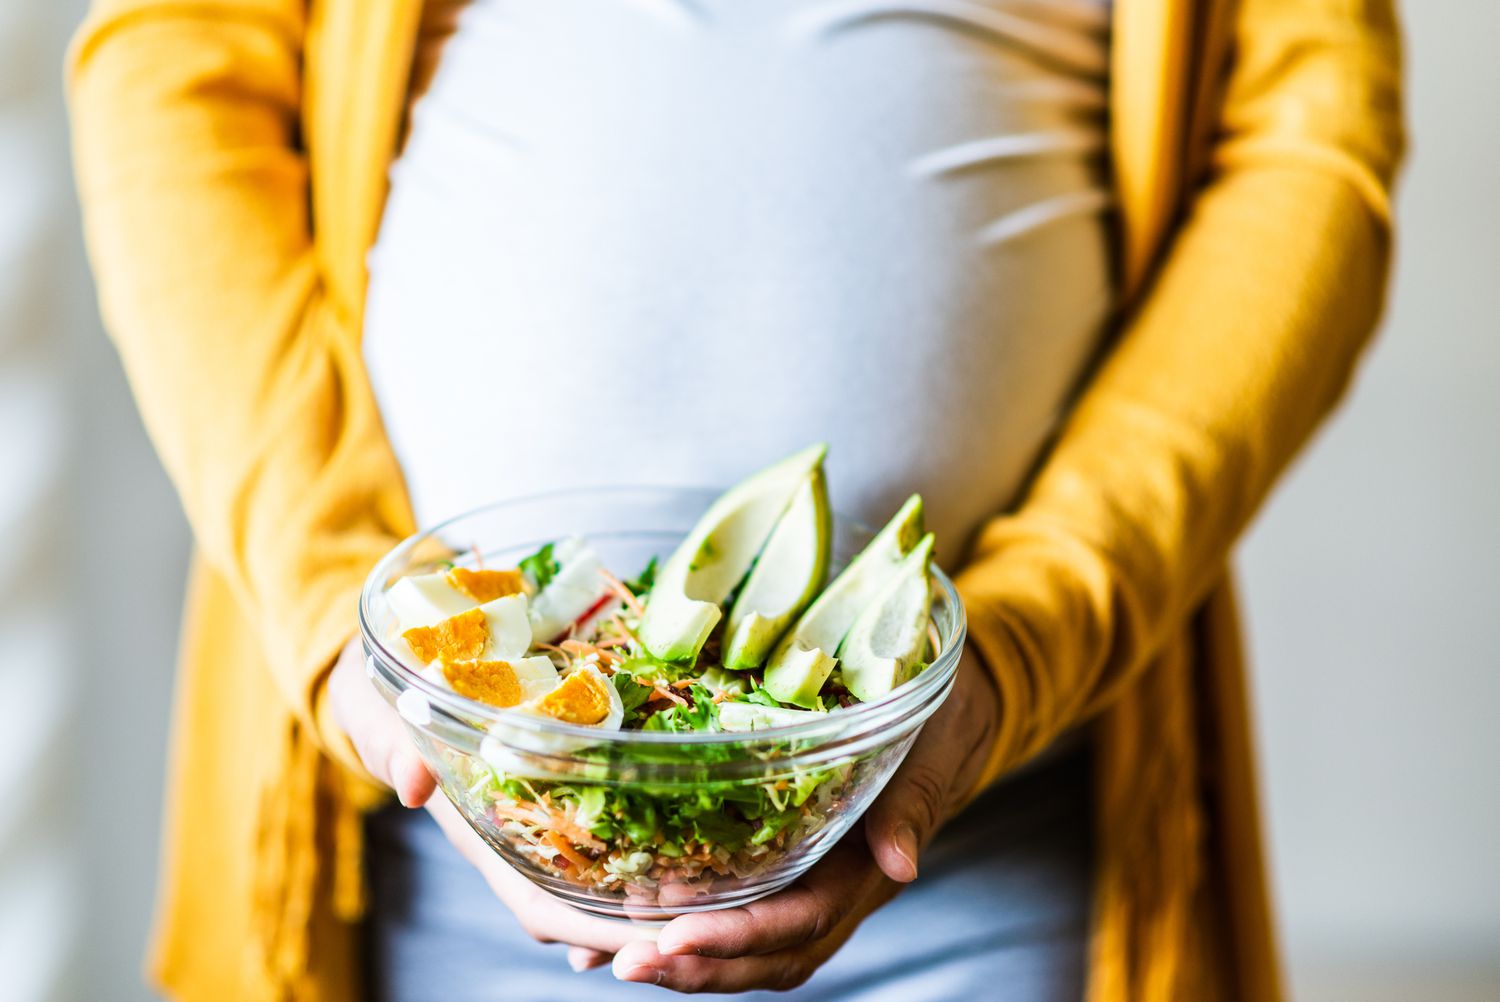 Pregnancy and healthy nutrition